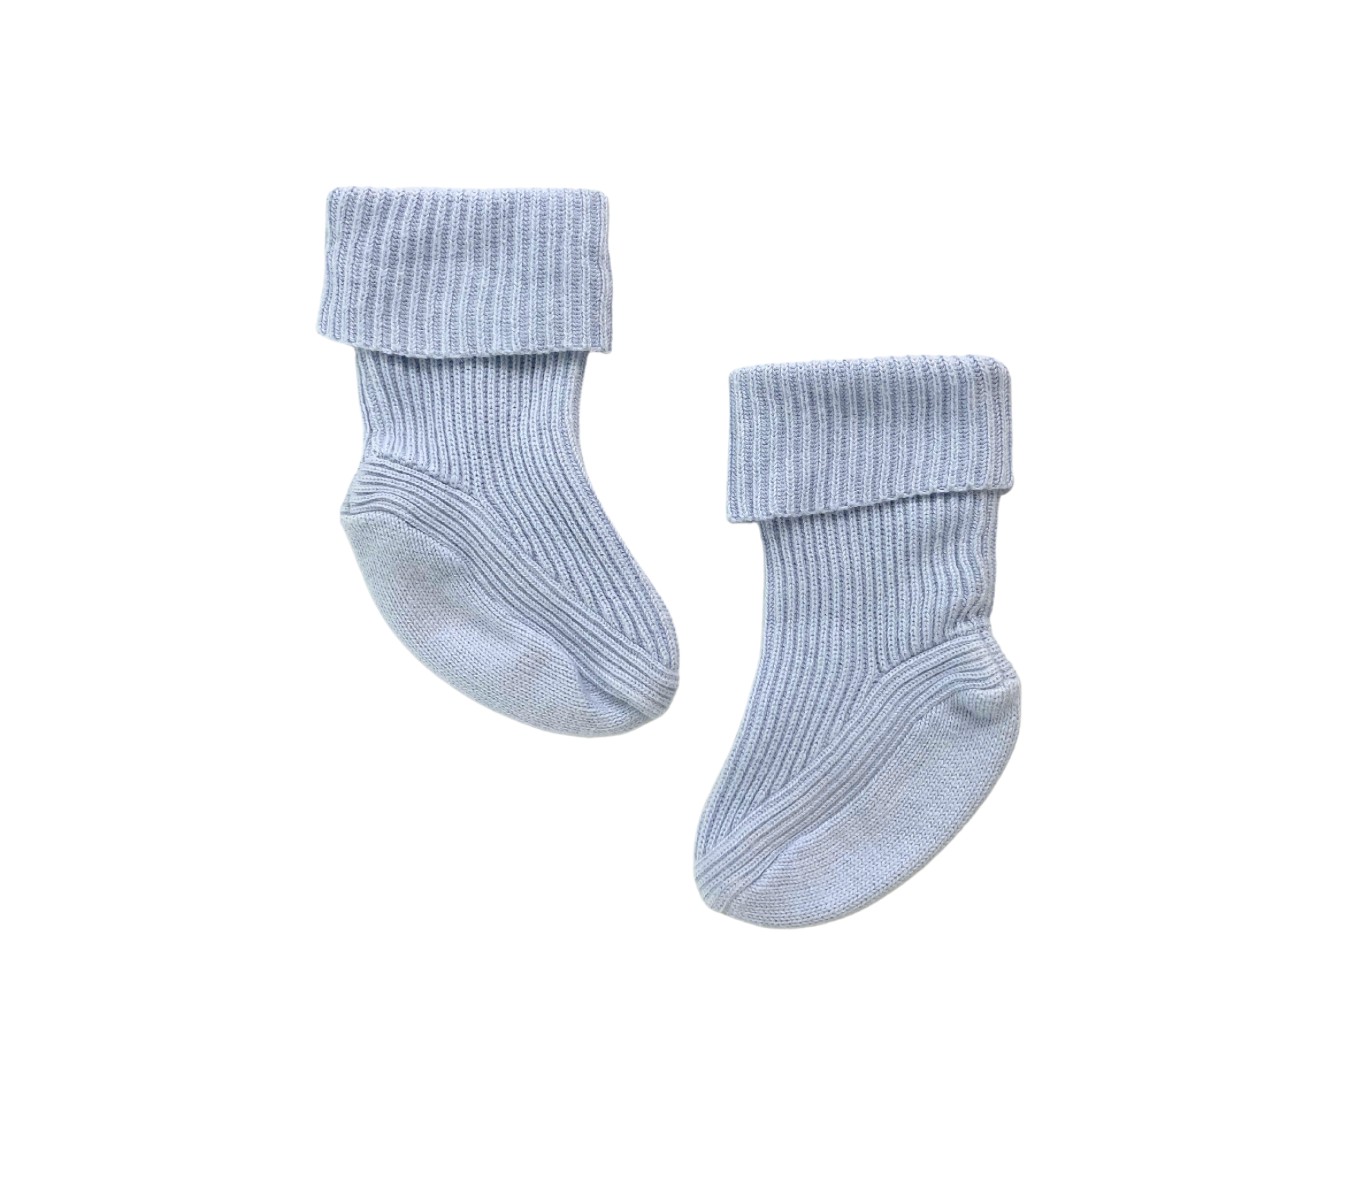 BABY DIOR - Chaussettes bleues - 1 an